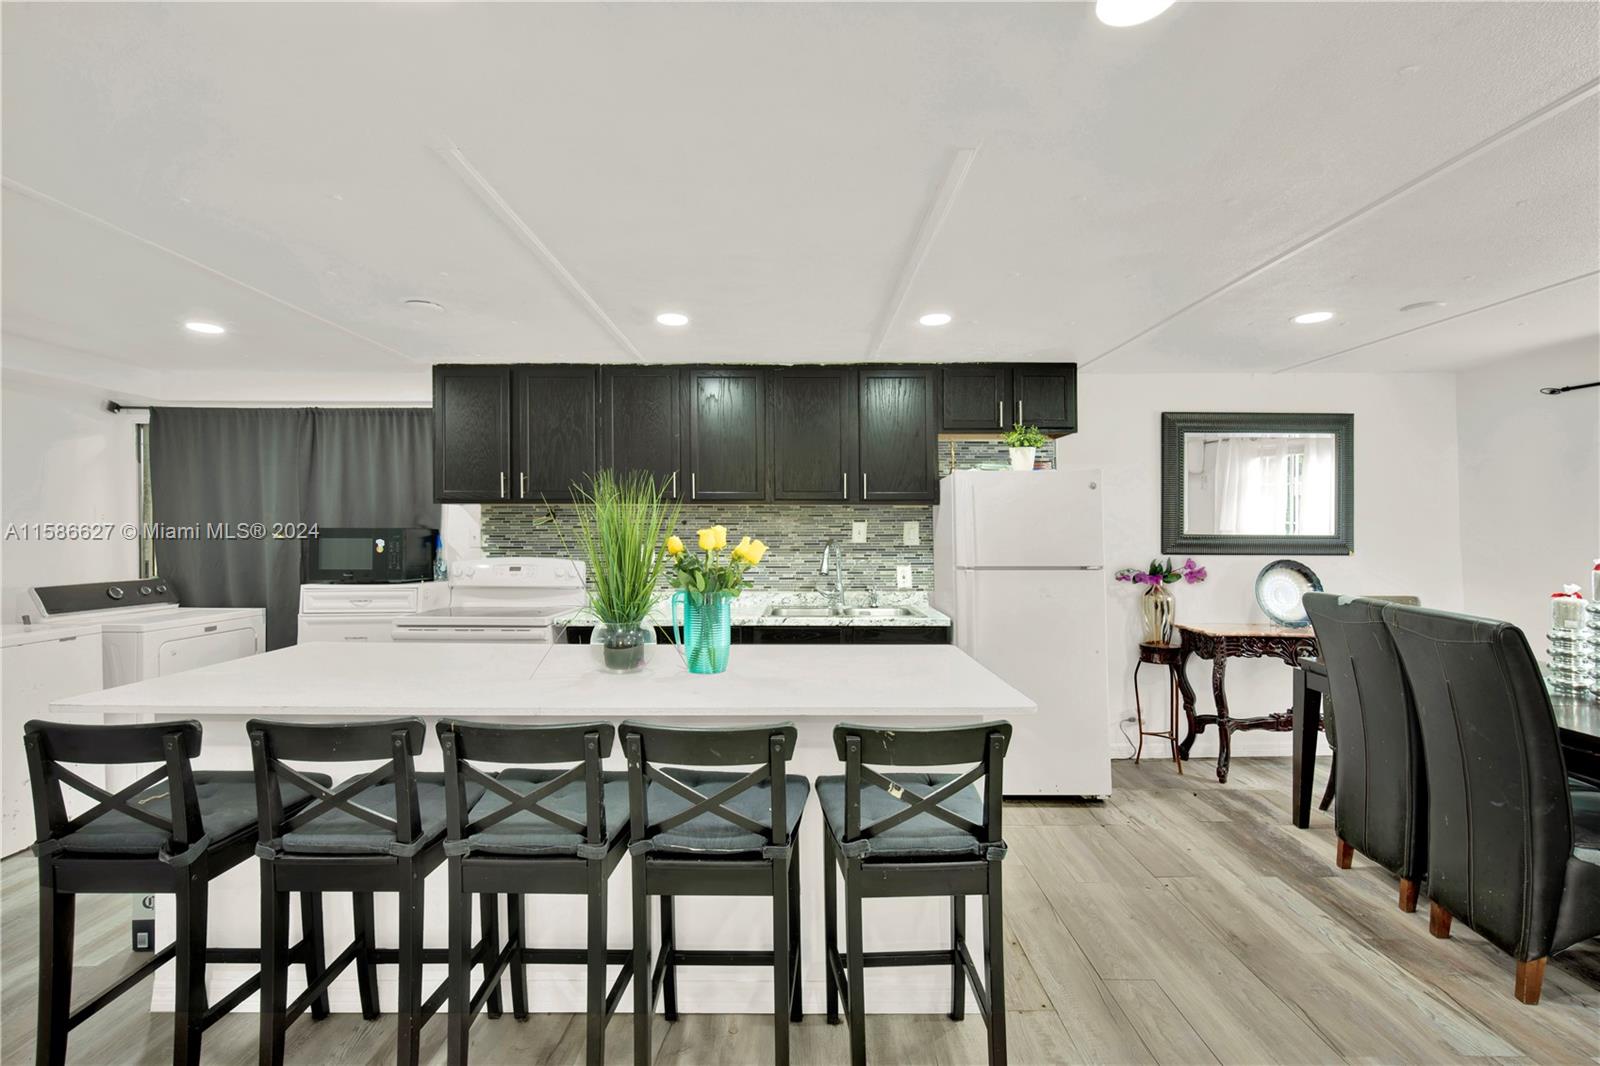 a kitchen with stainless steel appliances dining table chairs and cabinets